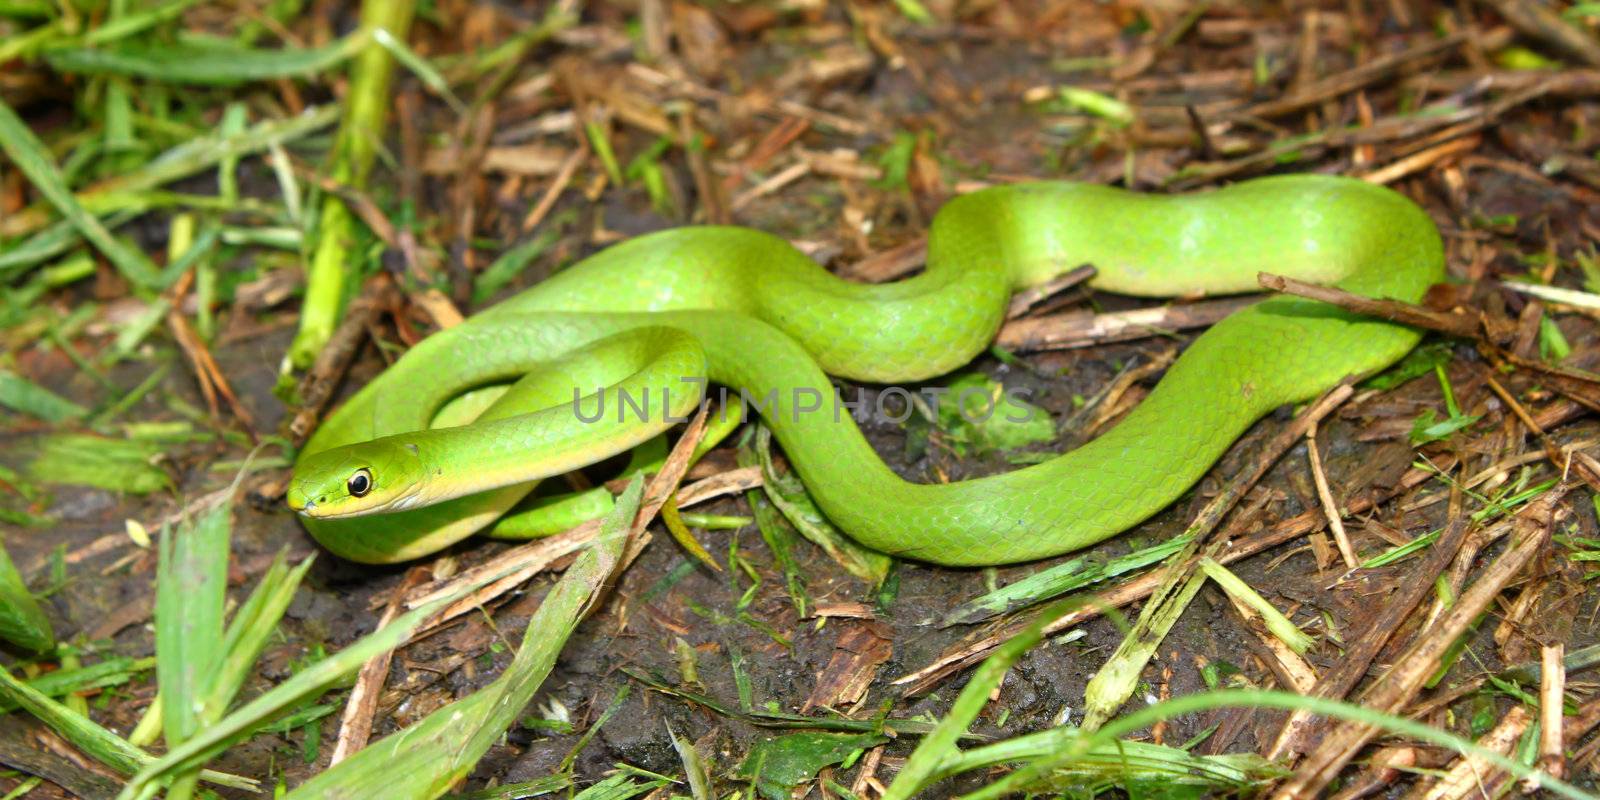 Smooth Green Snake (Opheodrys vernalis) by Wirepec